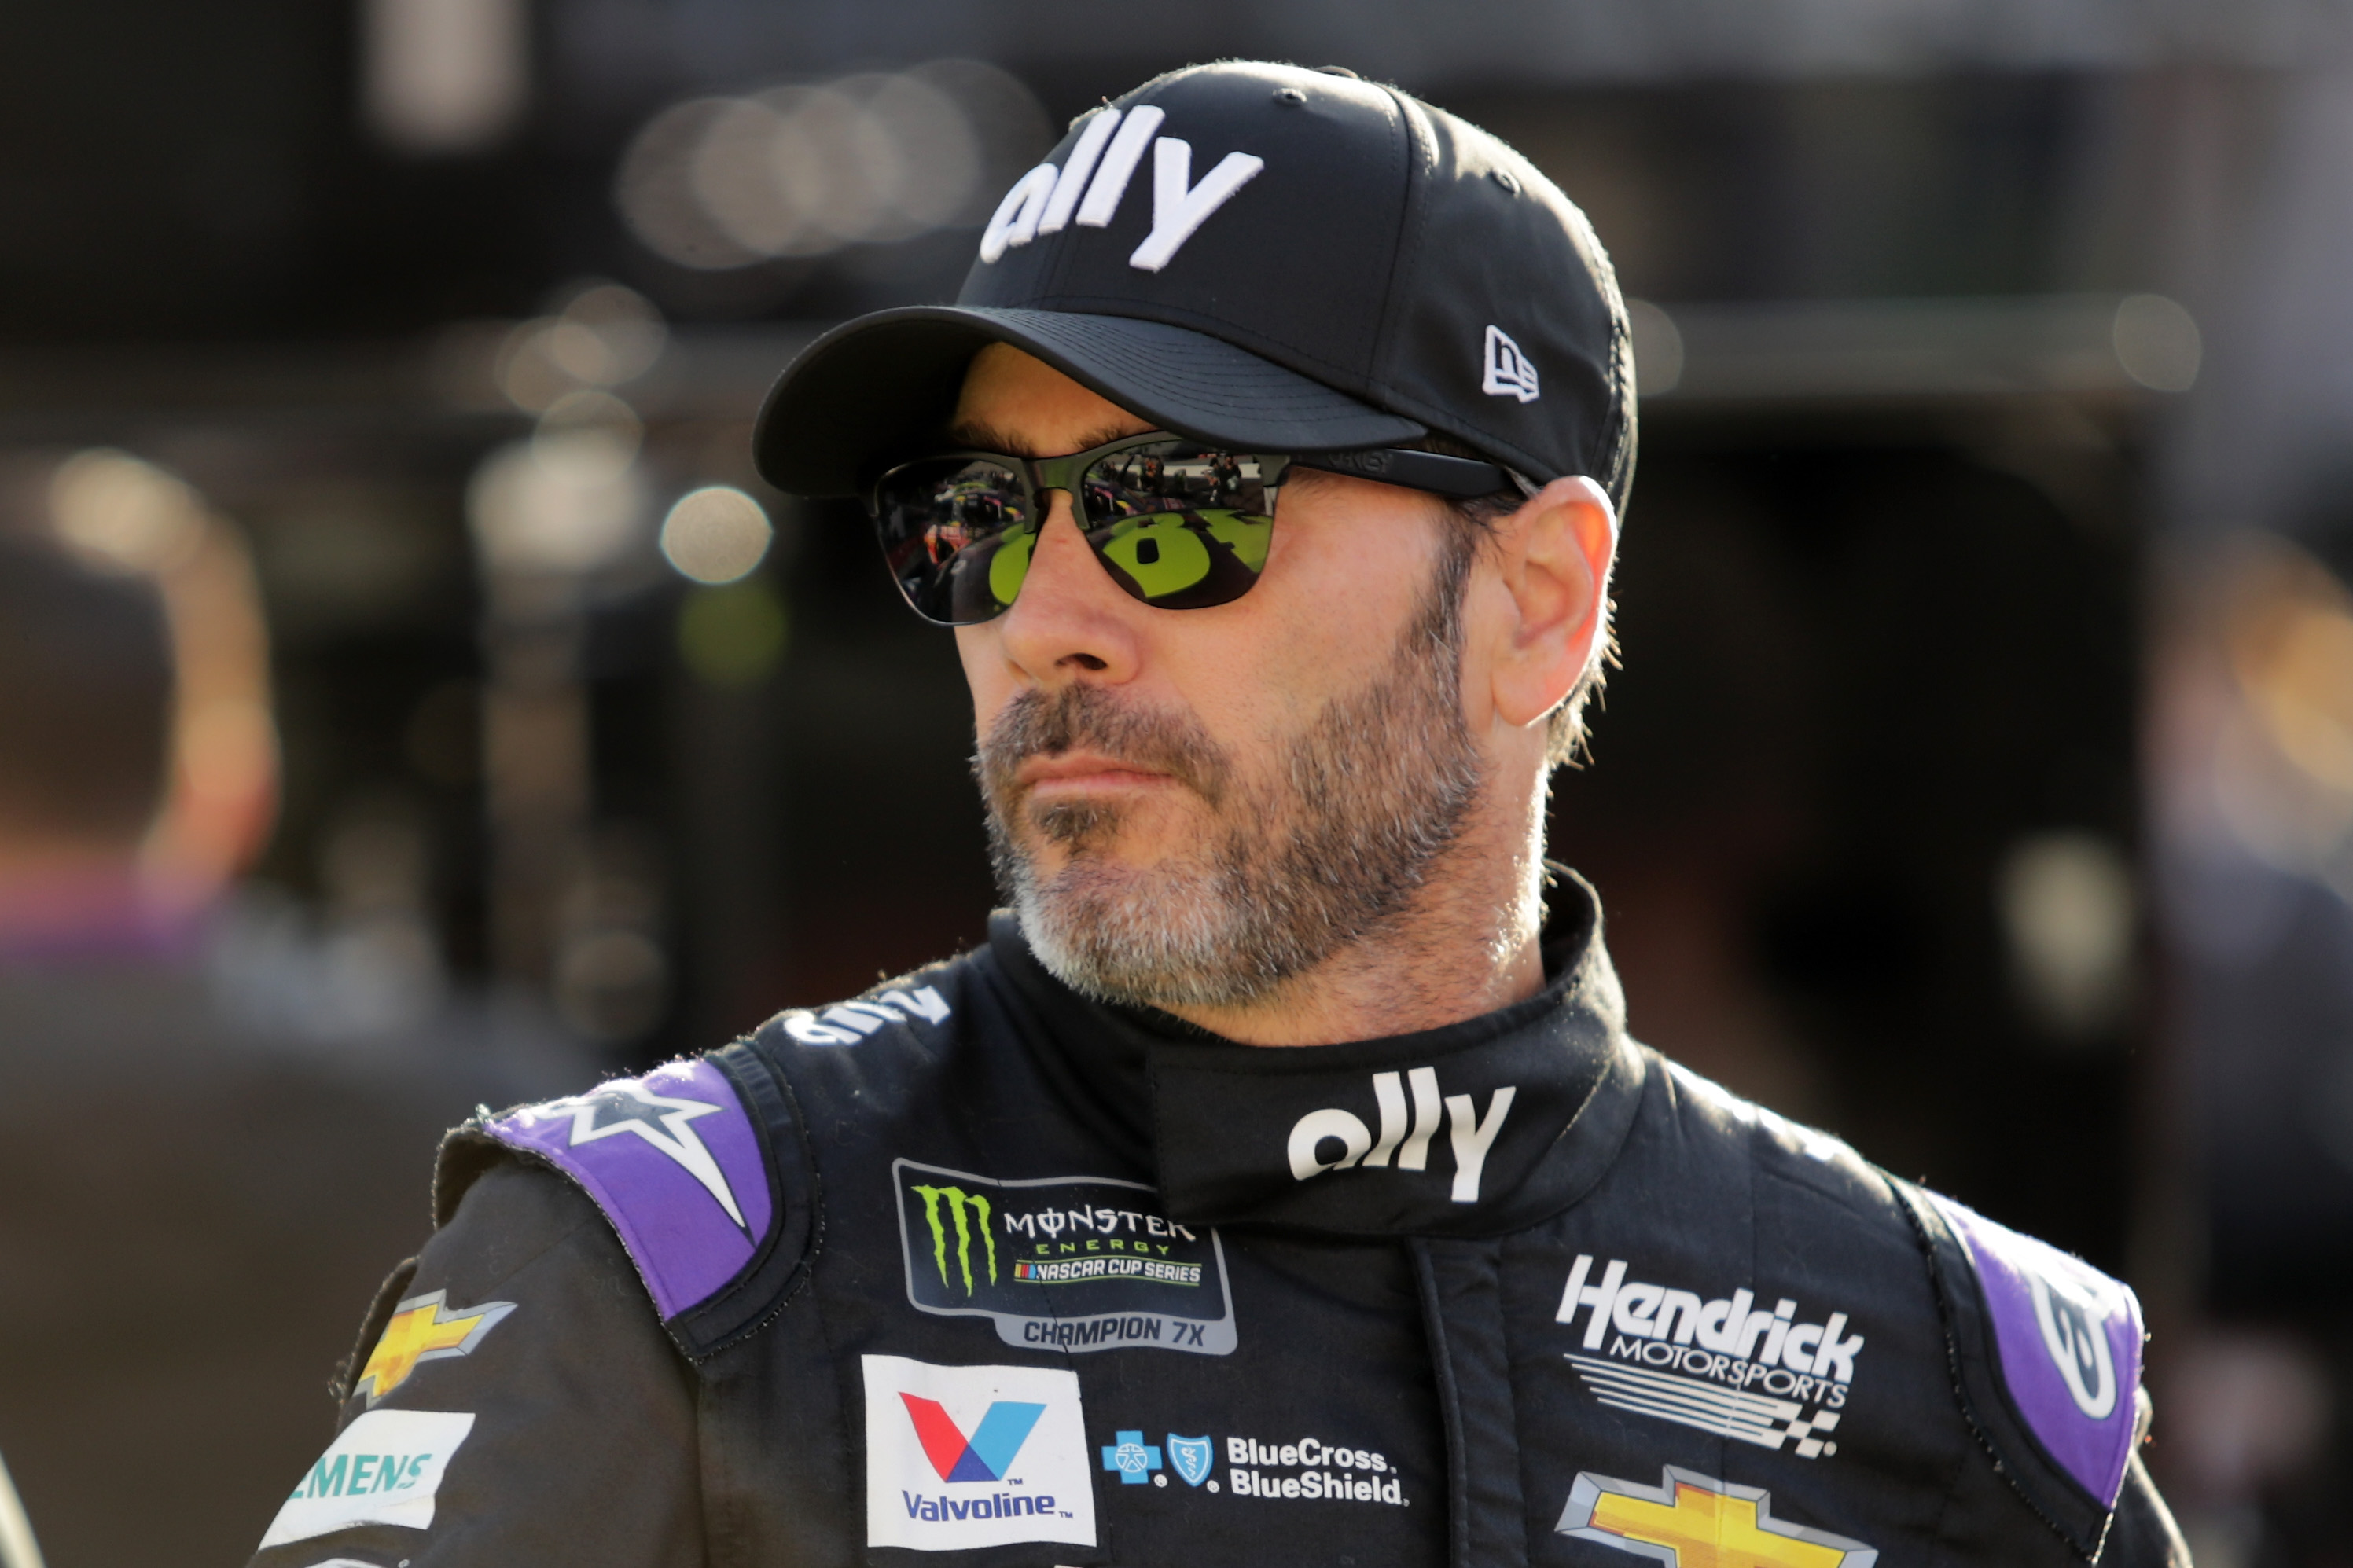 Jimmie Johnson Describes Extreme Heat NASCAR Drivers Face: ‘Every Muscle in My Body Locked Up’